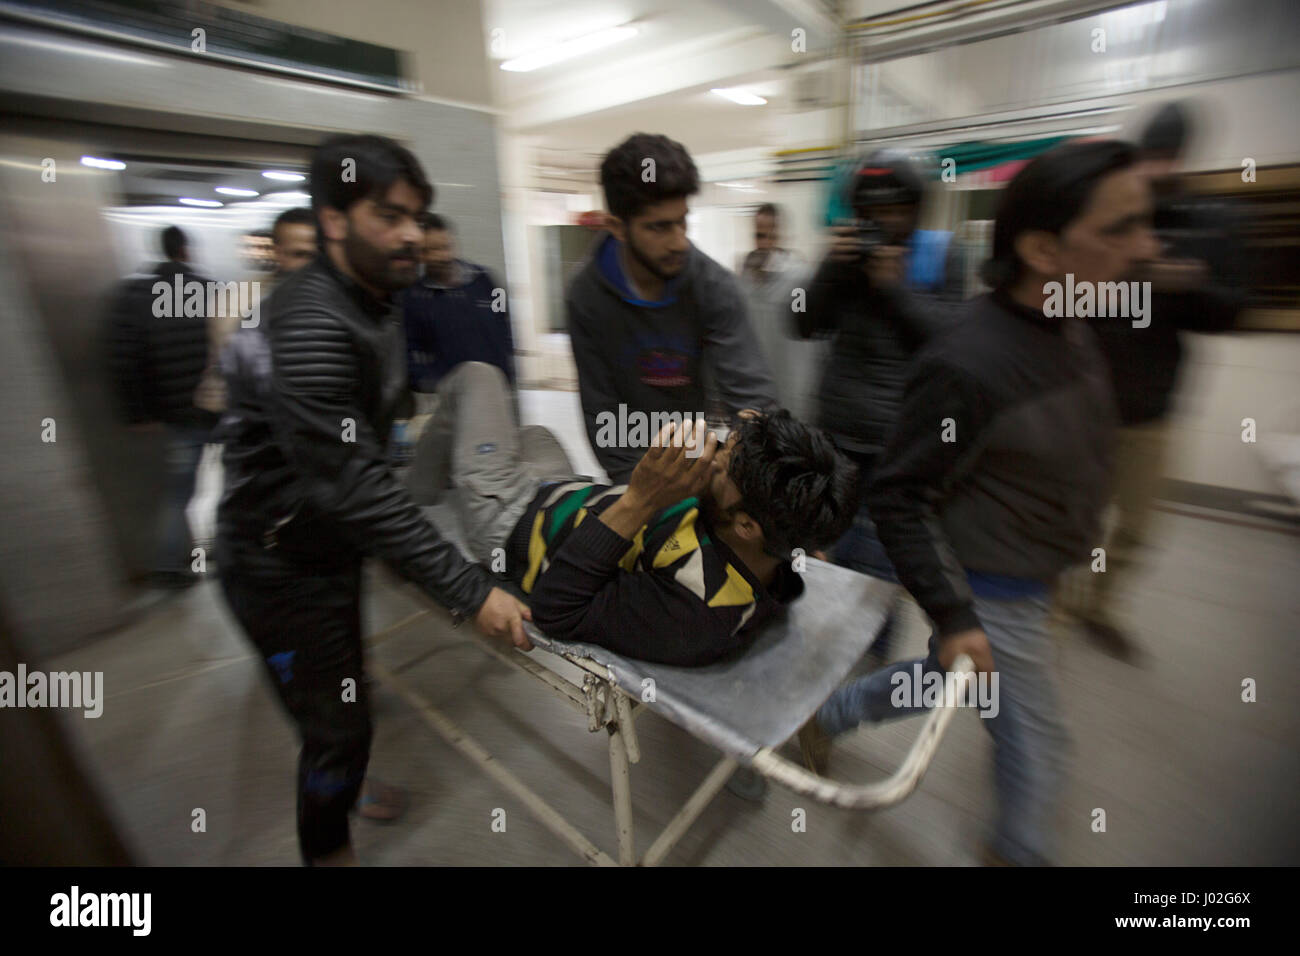 Srinagar, Indian-controlled Kashmir. 9th Apr, 2017. People transfer a wounded person inside a hospital in Srinagar, summer capital of Indian-controlled Kashmir, April 9, 2017. At least three persons were killed and several others injured on Sunday when Indian security forces opened fire on a stone-pelting mob that stormed a polling station in Indian-controlled Kashmir's parliamentary constituency of Srinagar. Credit: Javed Dar/Xinhua/Alamy Live News Stock Photo